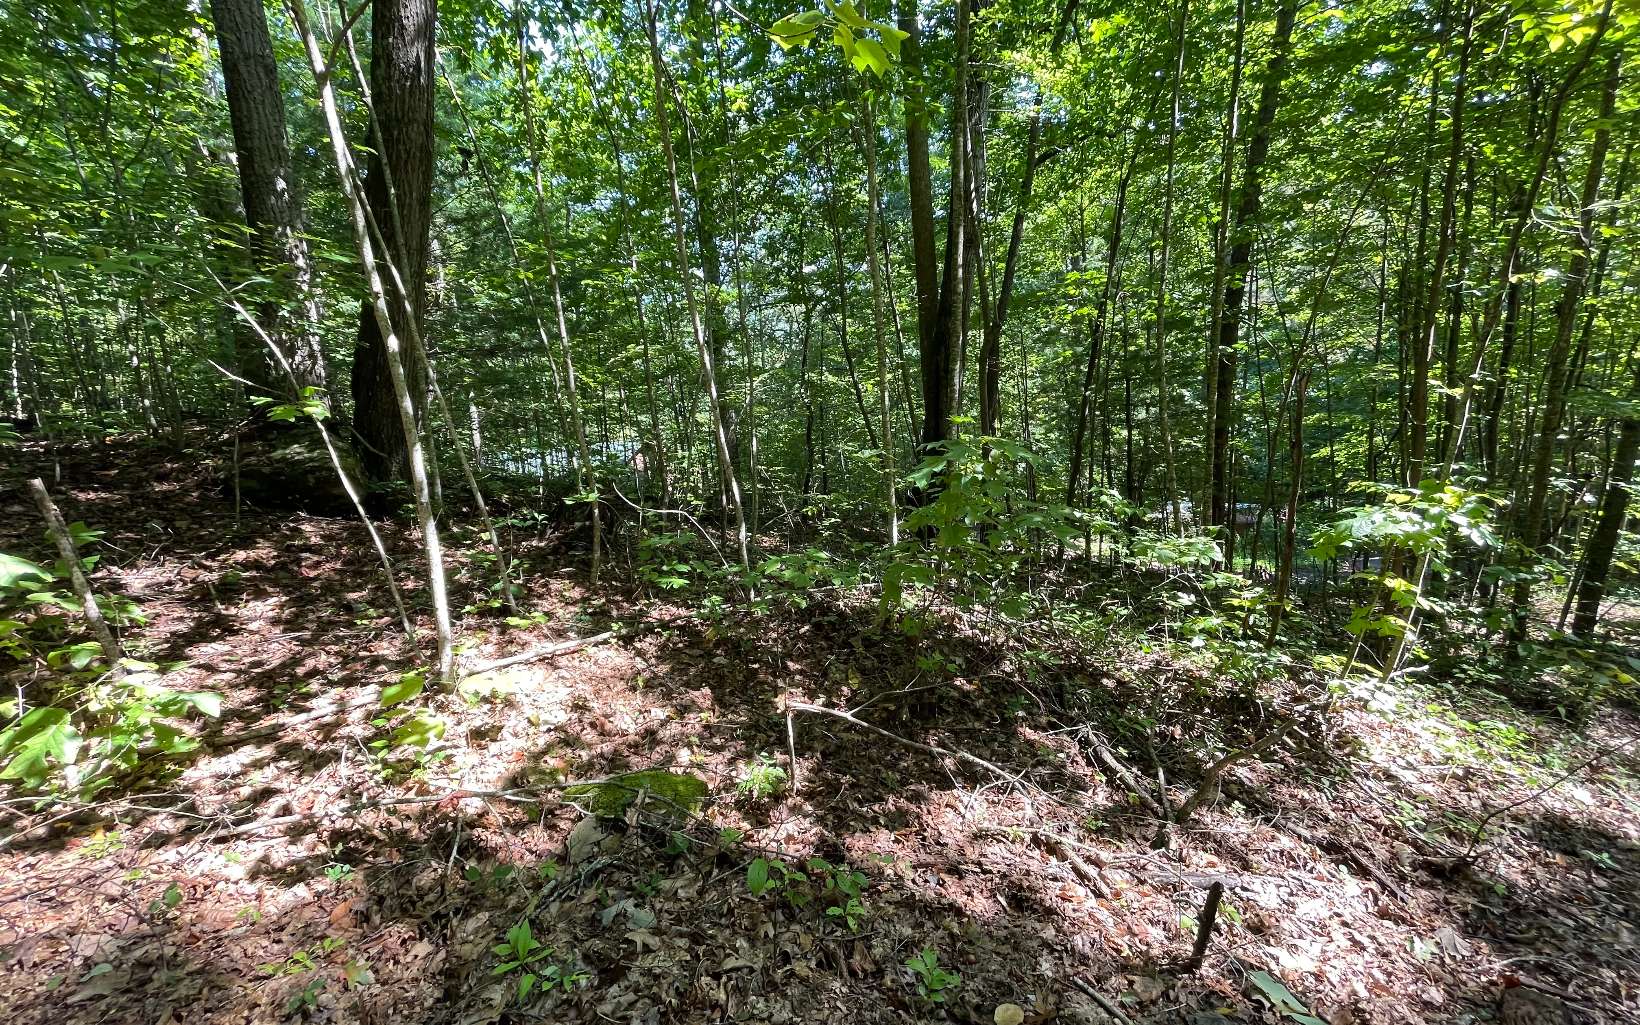 BEAUTIFULLY WOODED LOT IN THE MOUNTAINS OF NORTH GEORGIA! Located in the small town of Hiawassee, GA this lot would be the perfect place to build your mountain retreat. Fresh clean air, lots of wildlife and the peace & quiet we all seek.